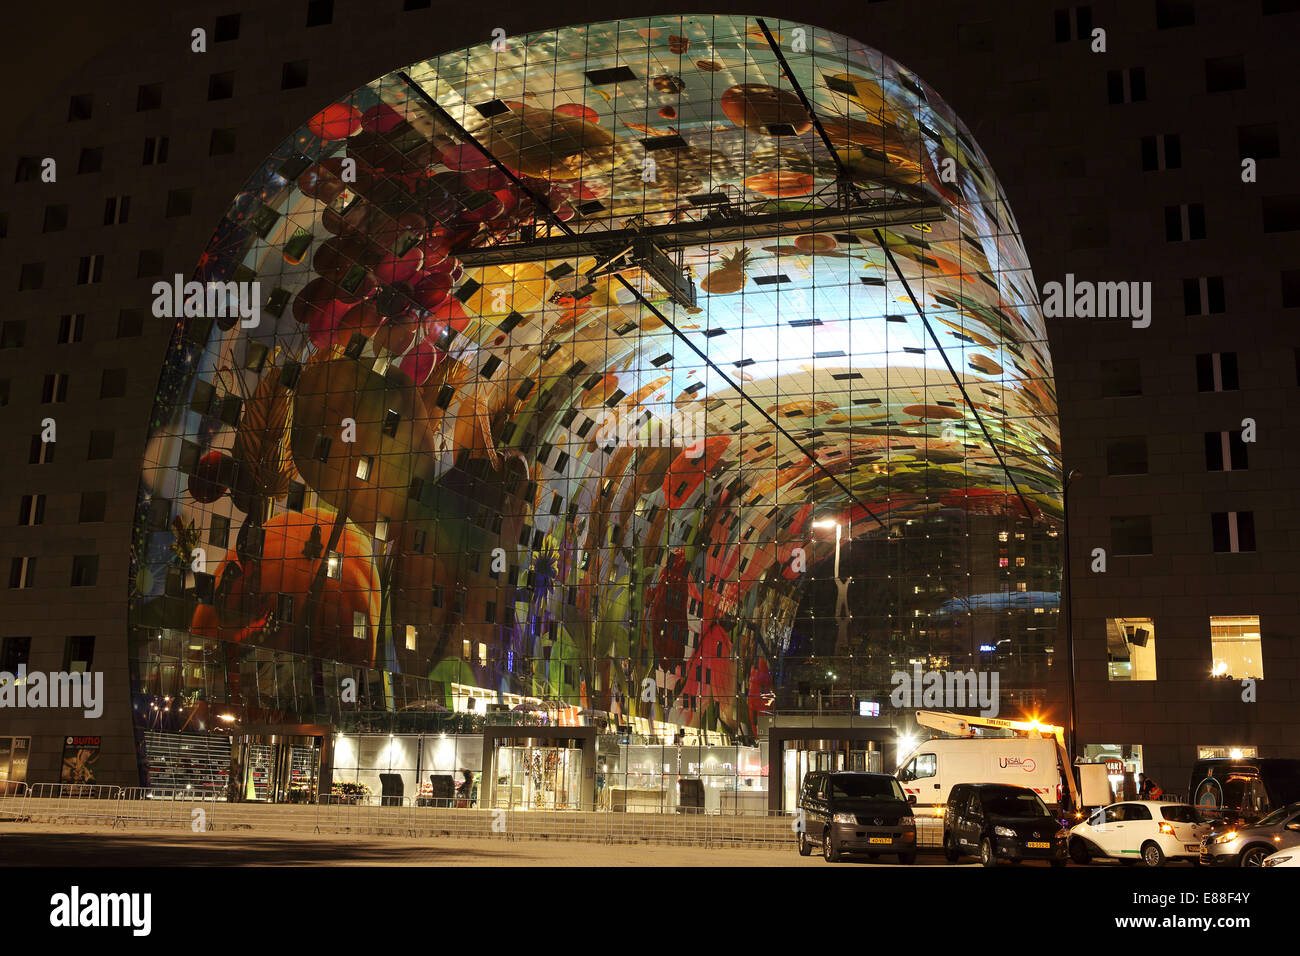 Rotterdam, Netherlands. 30th Sept, 2014. The Markthal Rotterdam at night in Rotterdam, the Netherlands. The covered market was designed by architects MVRDV and the interior bears the biggest artwork in the Netherlands, 'The Horn of Plenty' by Arno Coenen and Iris Roskam. The market was officially opened by Queen Maxima on 1 October 2014. Credit:  Stuart Forster/Alamy Live News Stock Photo